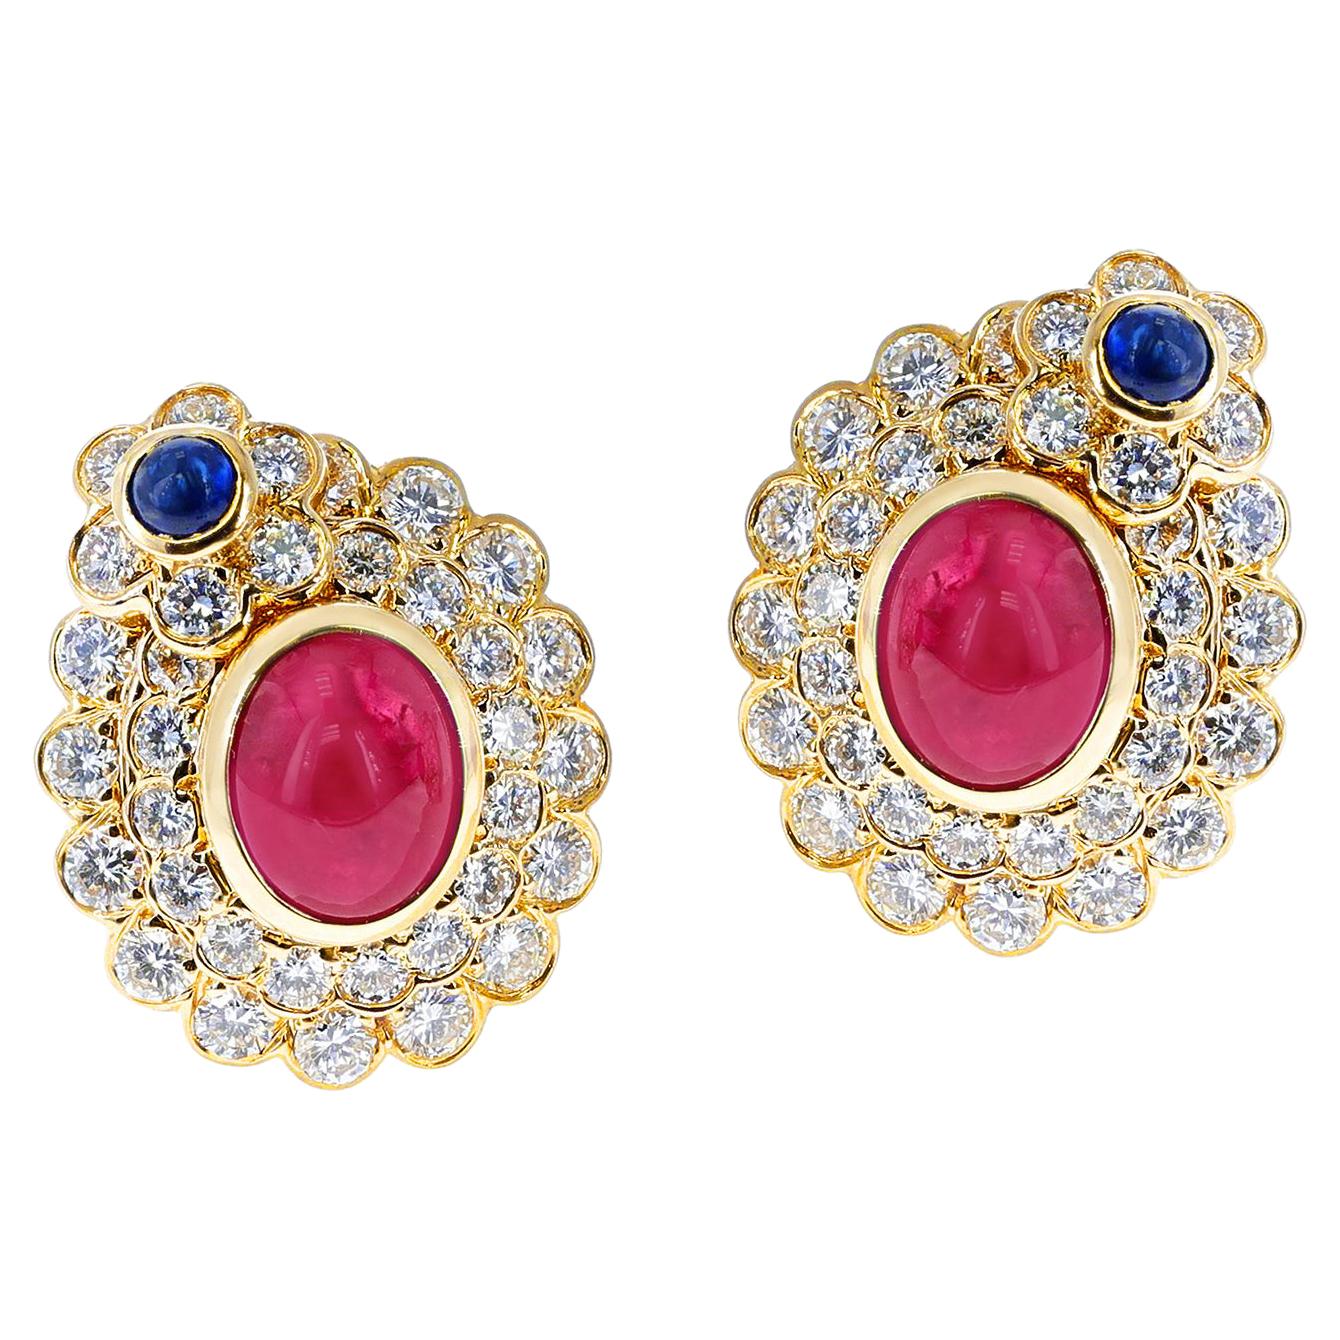 5.82 ct. Oval Ruby Cabochon and Sapphire Cabochon and Diamonds Earrings